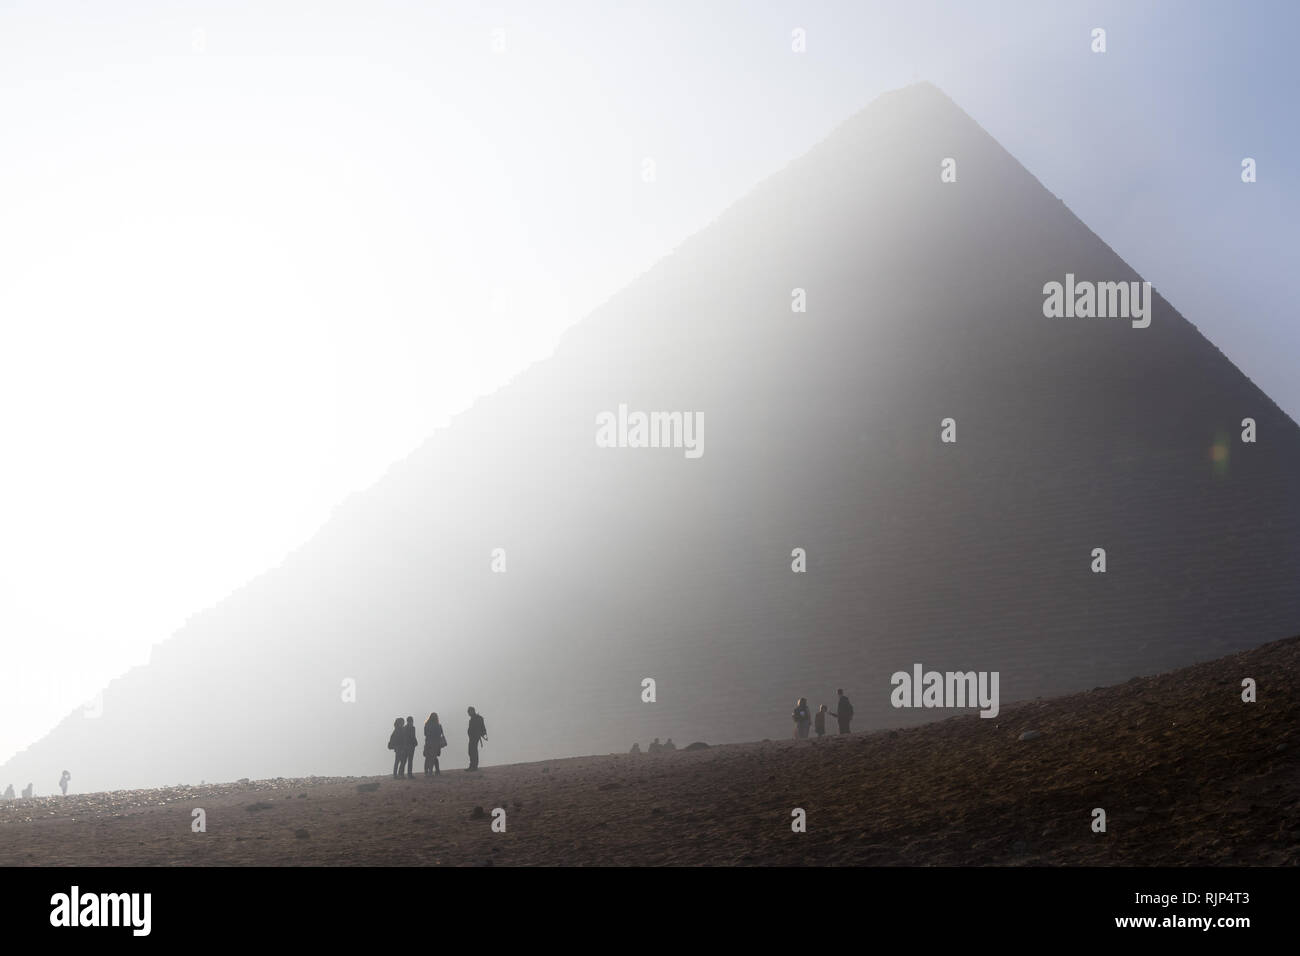 Sunrise and early visitors in front of the Great Pyramid of Giza (Pyramid of Khufu) at Giza near Cairo, Egypt. Stock Photo